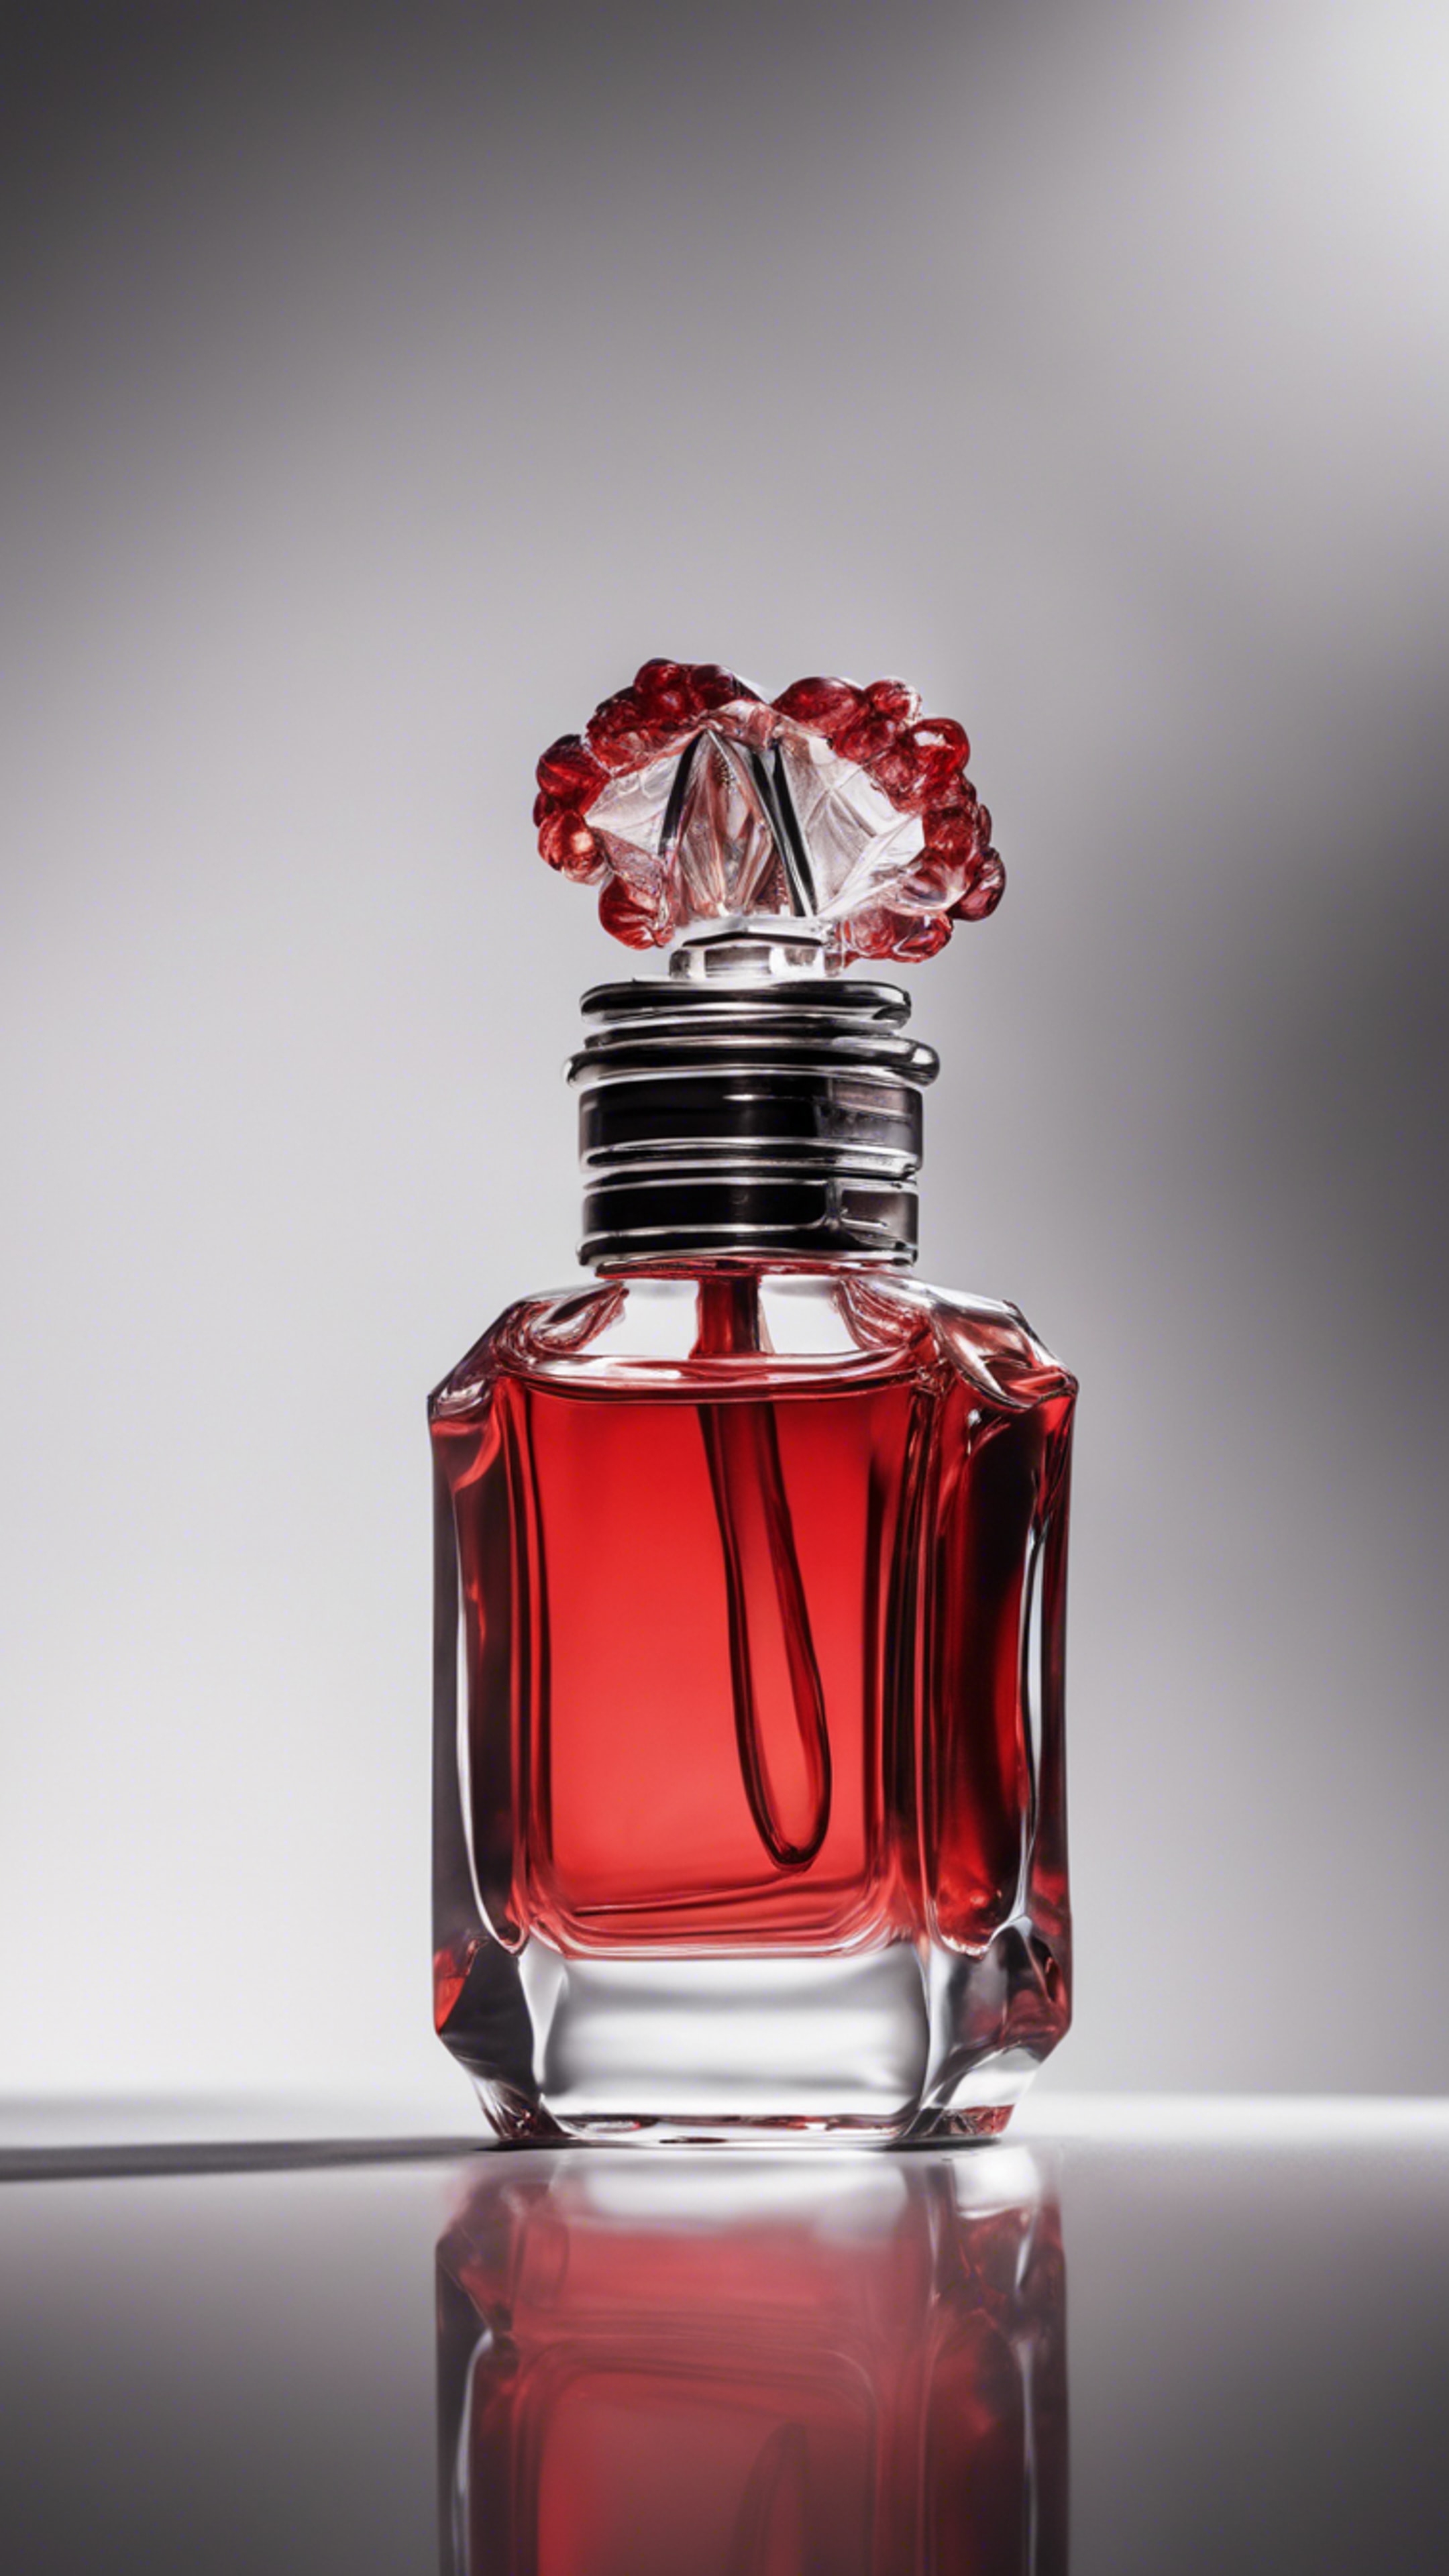 The portrait of a sassy red perfume bottle clashing against a pure white backdrop. Tapeta[8445b62606744831bb5a]